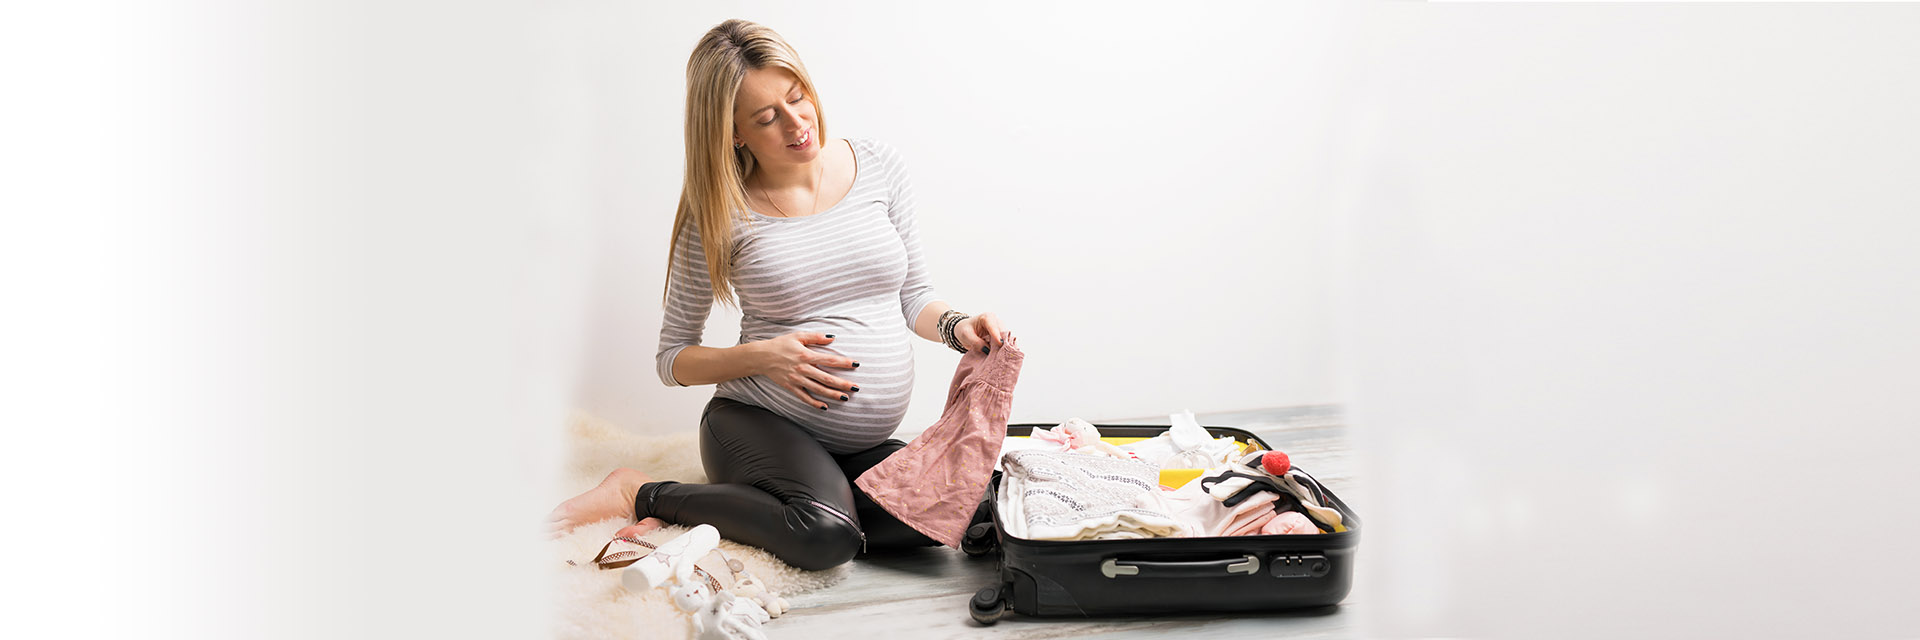 Pregnant woman sitting on floor and packing an overnight bag